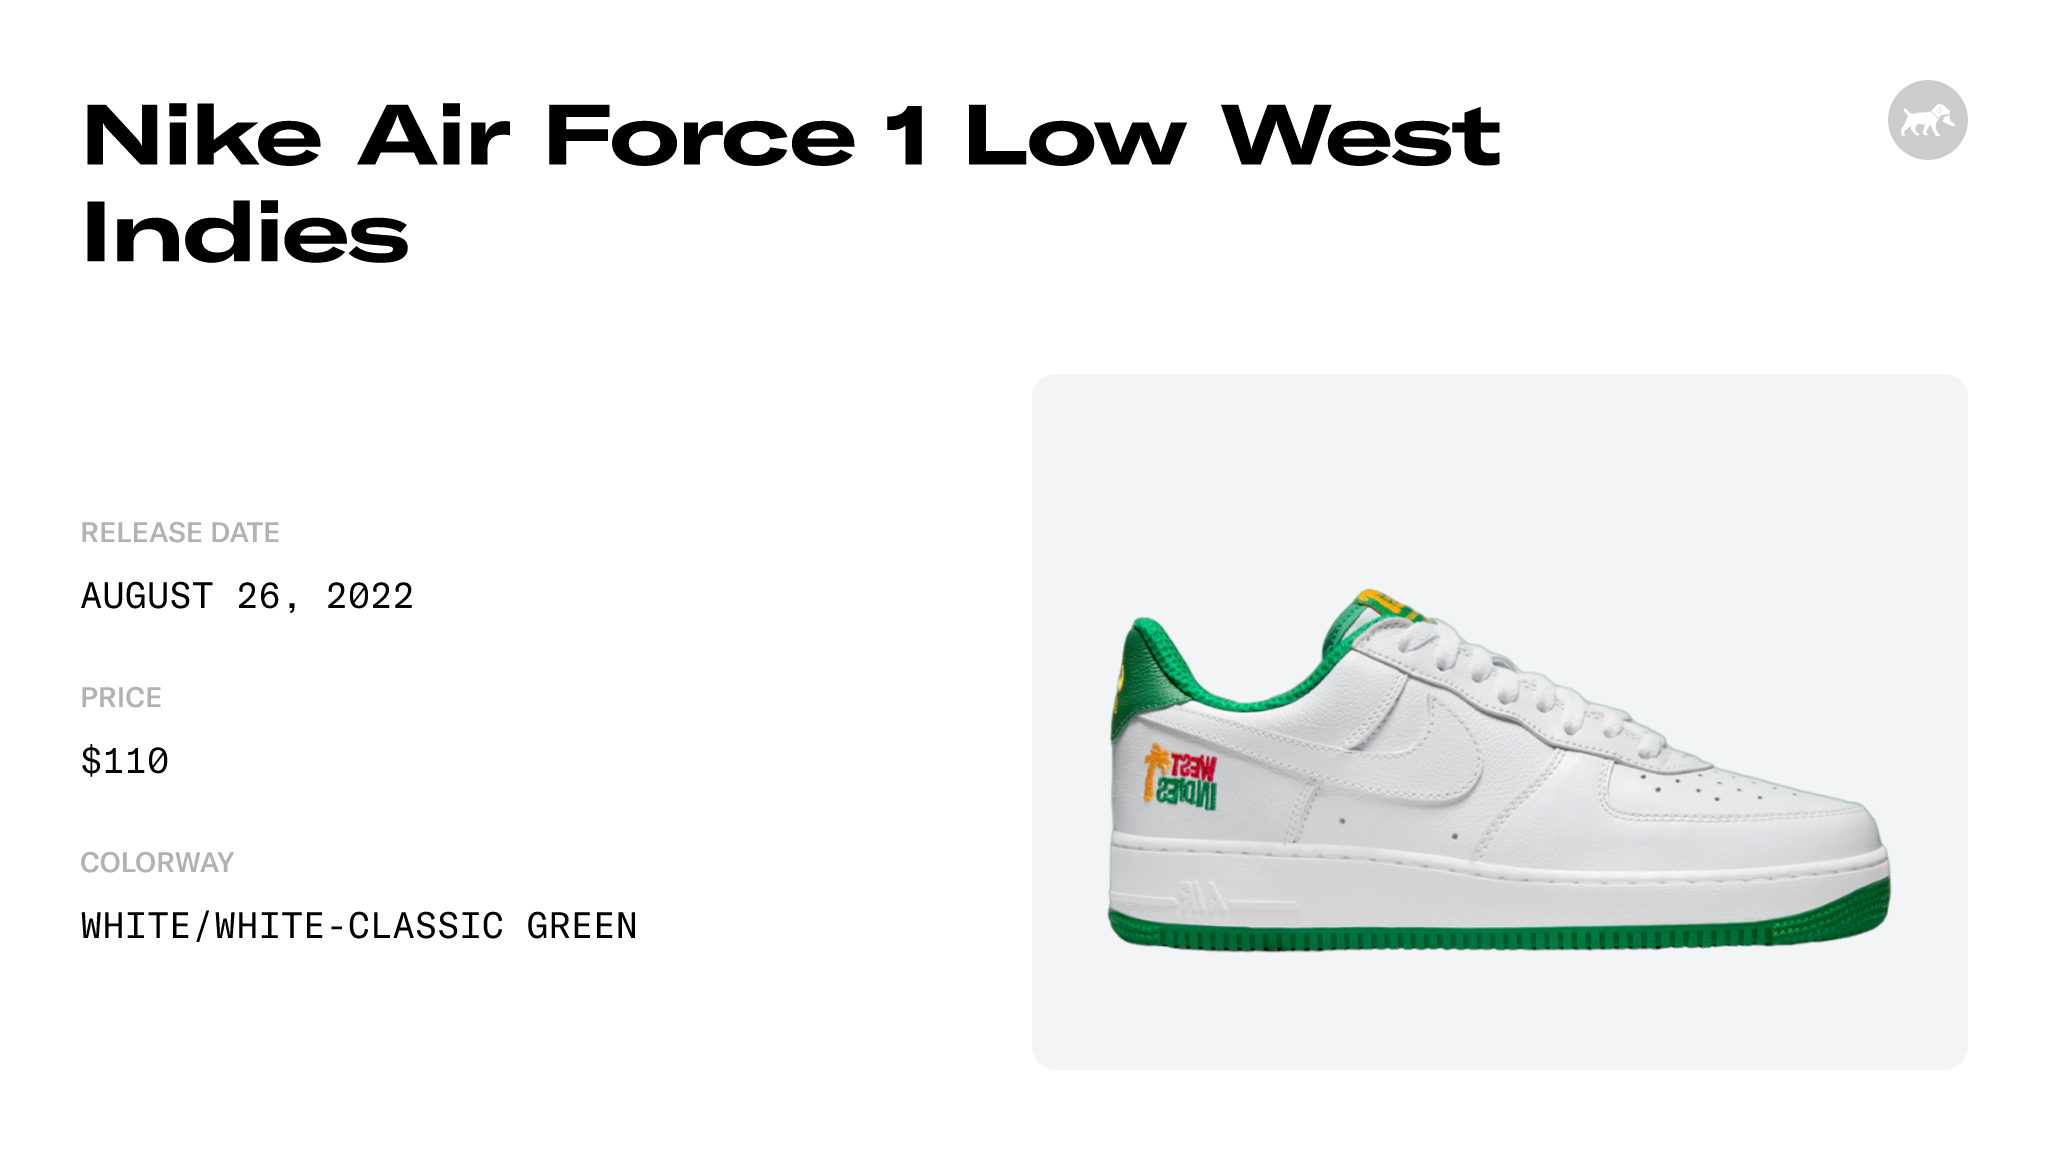 Nike Air Force 1 Low West Indies - DX1156-100 Raffles and Release Date